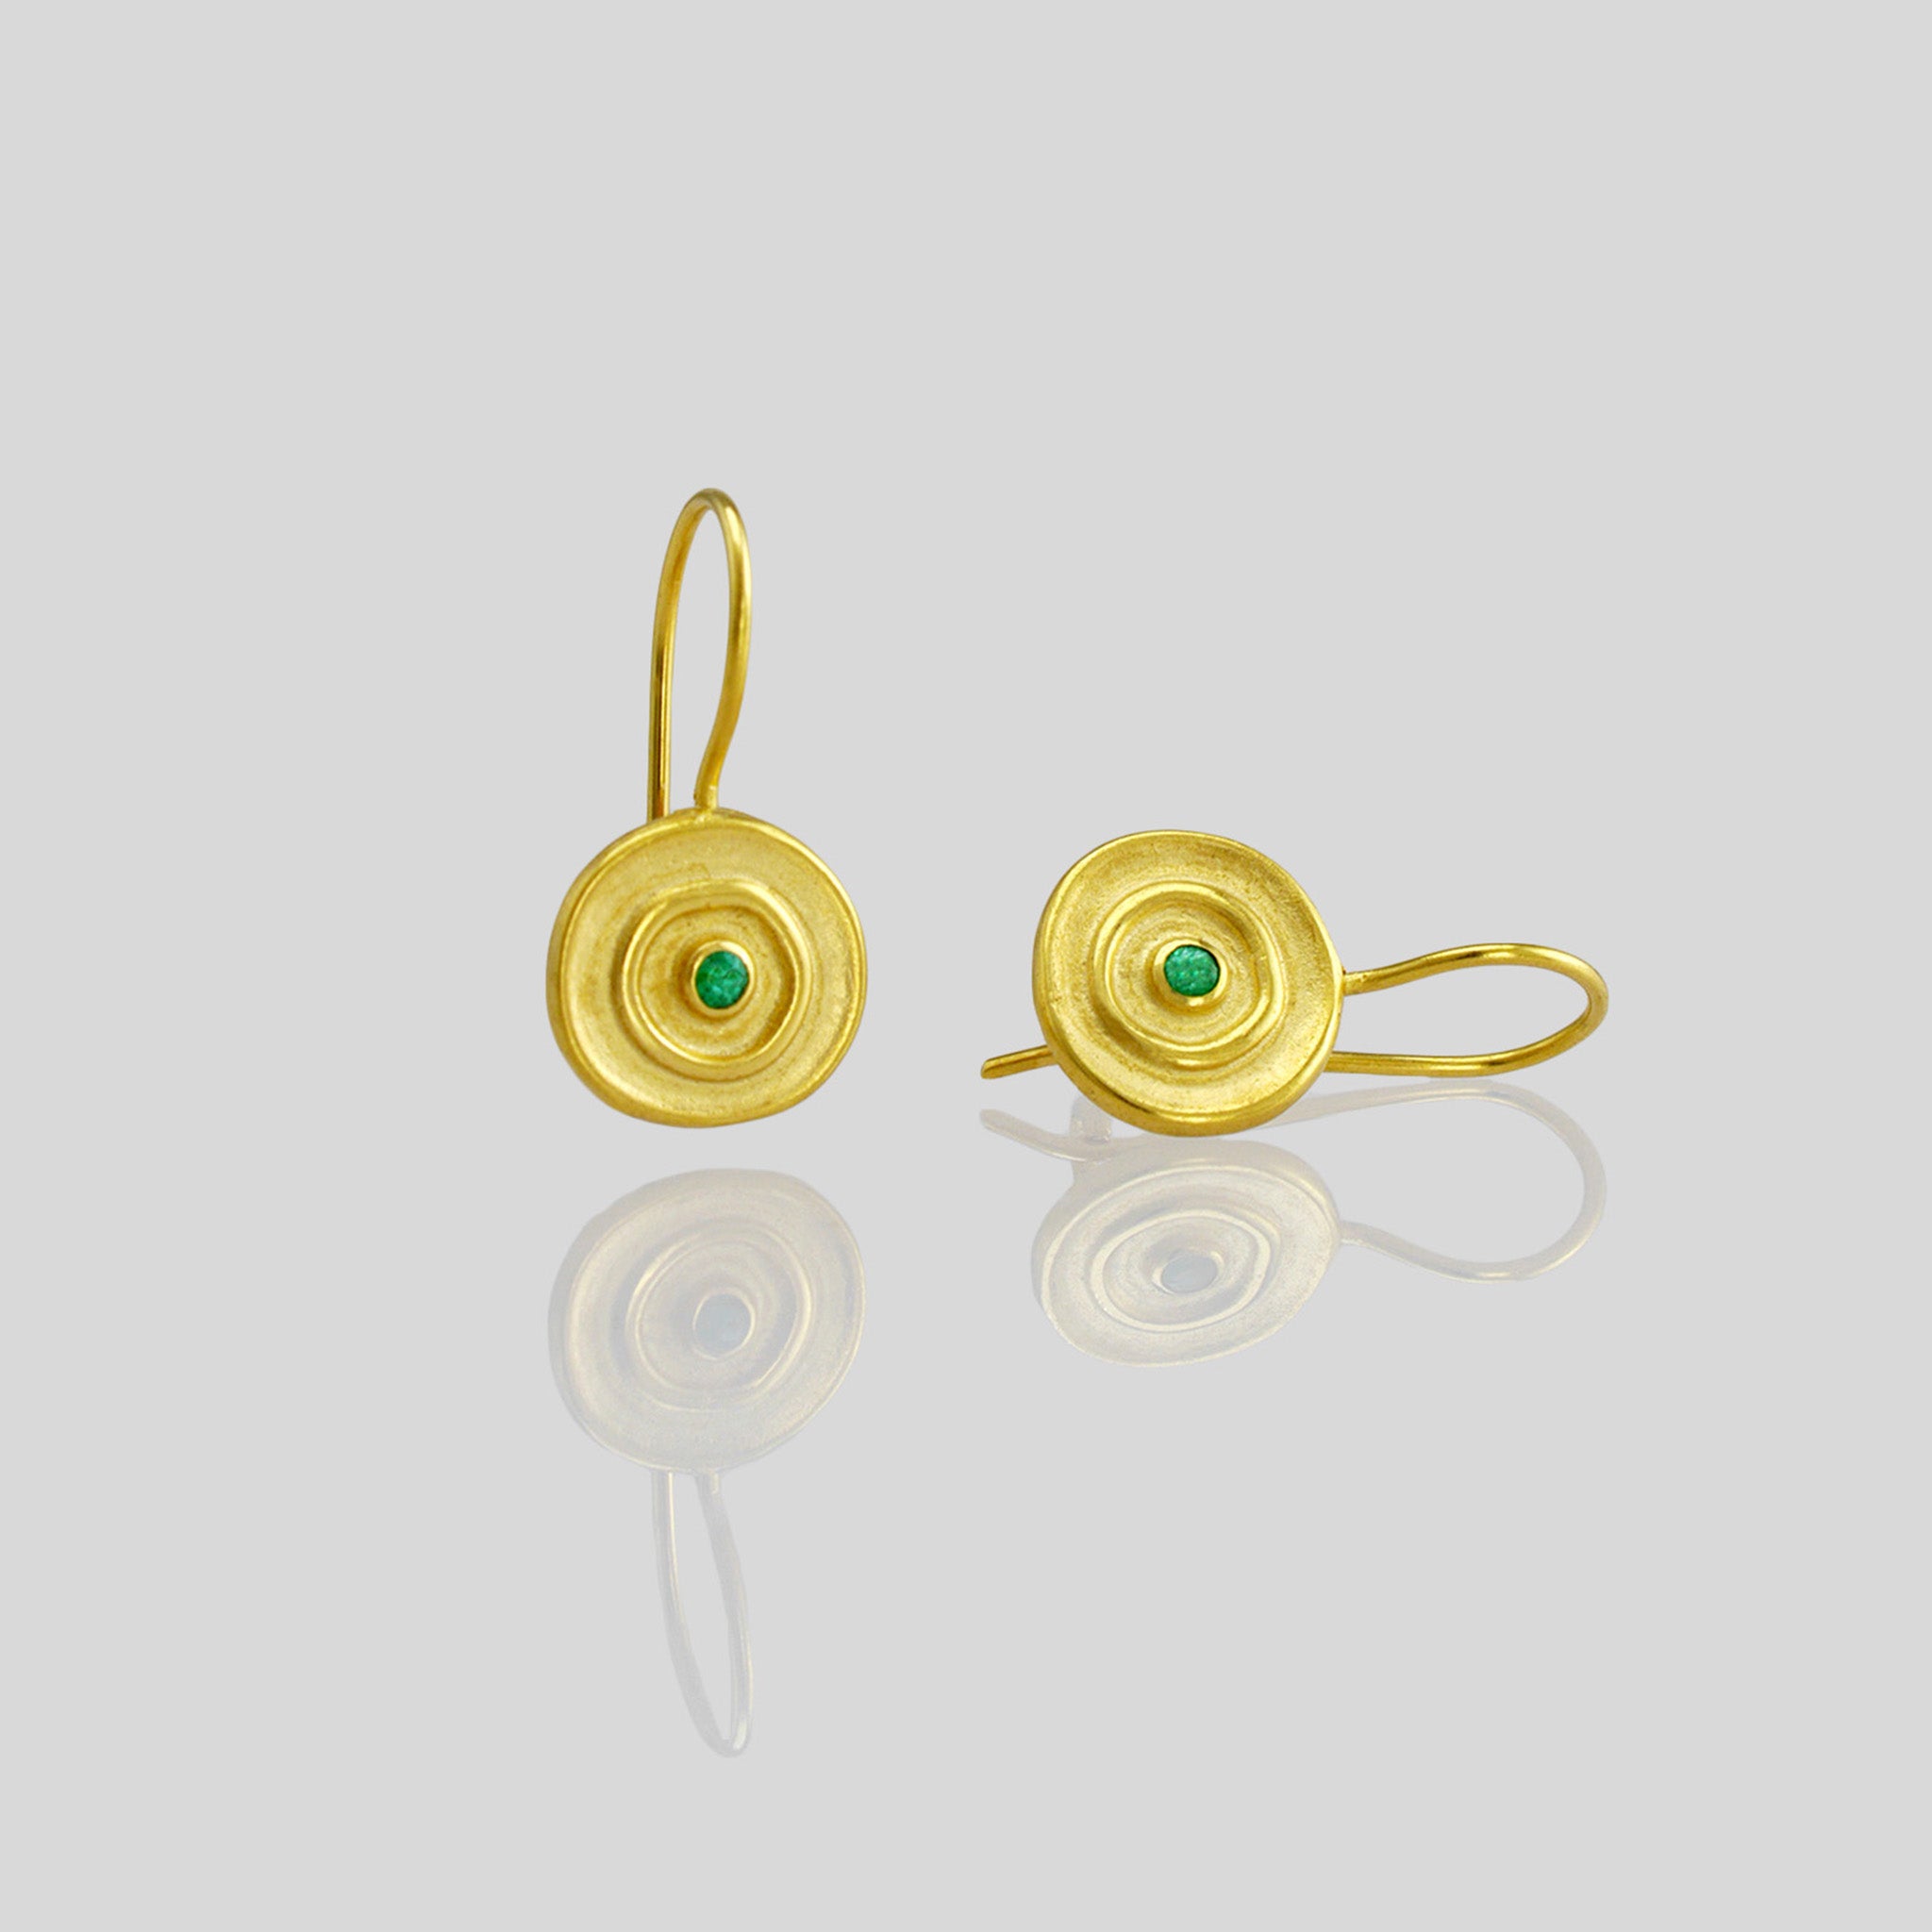 close up of Hand-made 18k gold round drop earrings with a central Emerald gemstone, inspired by ancient Egyptian Pharaohs' gold jewelry.